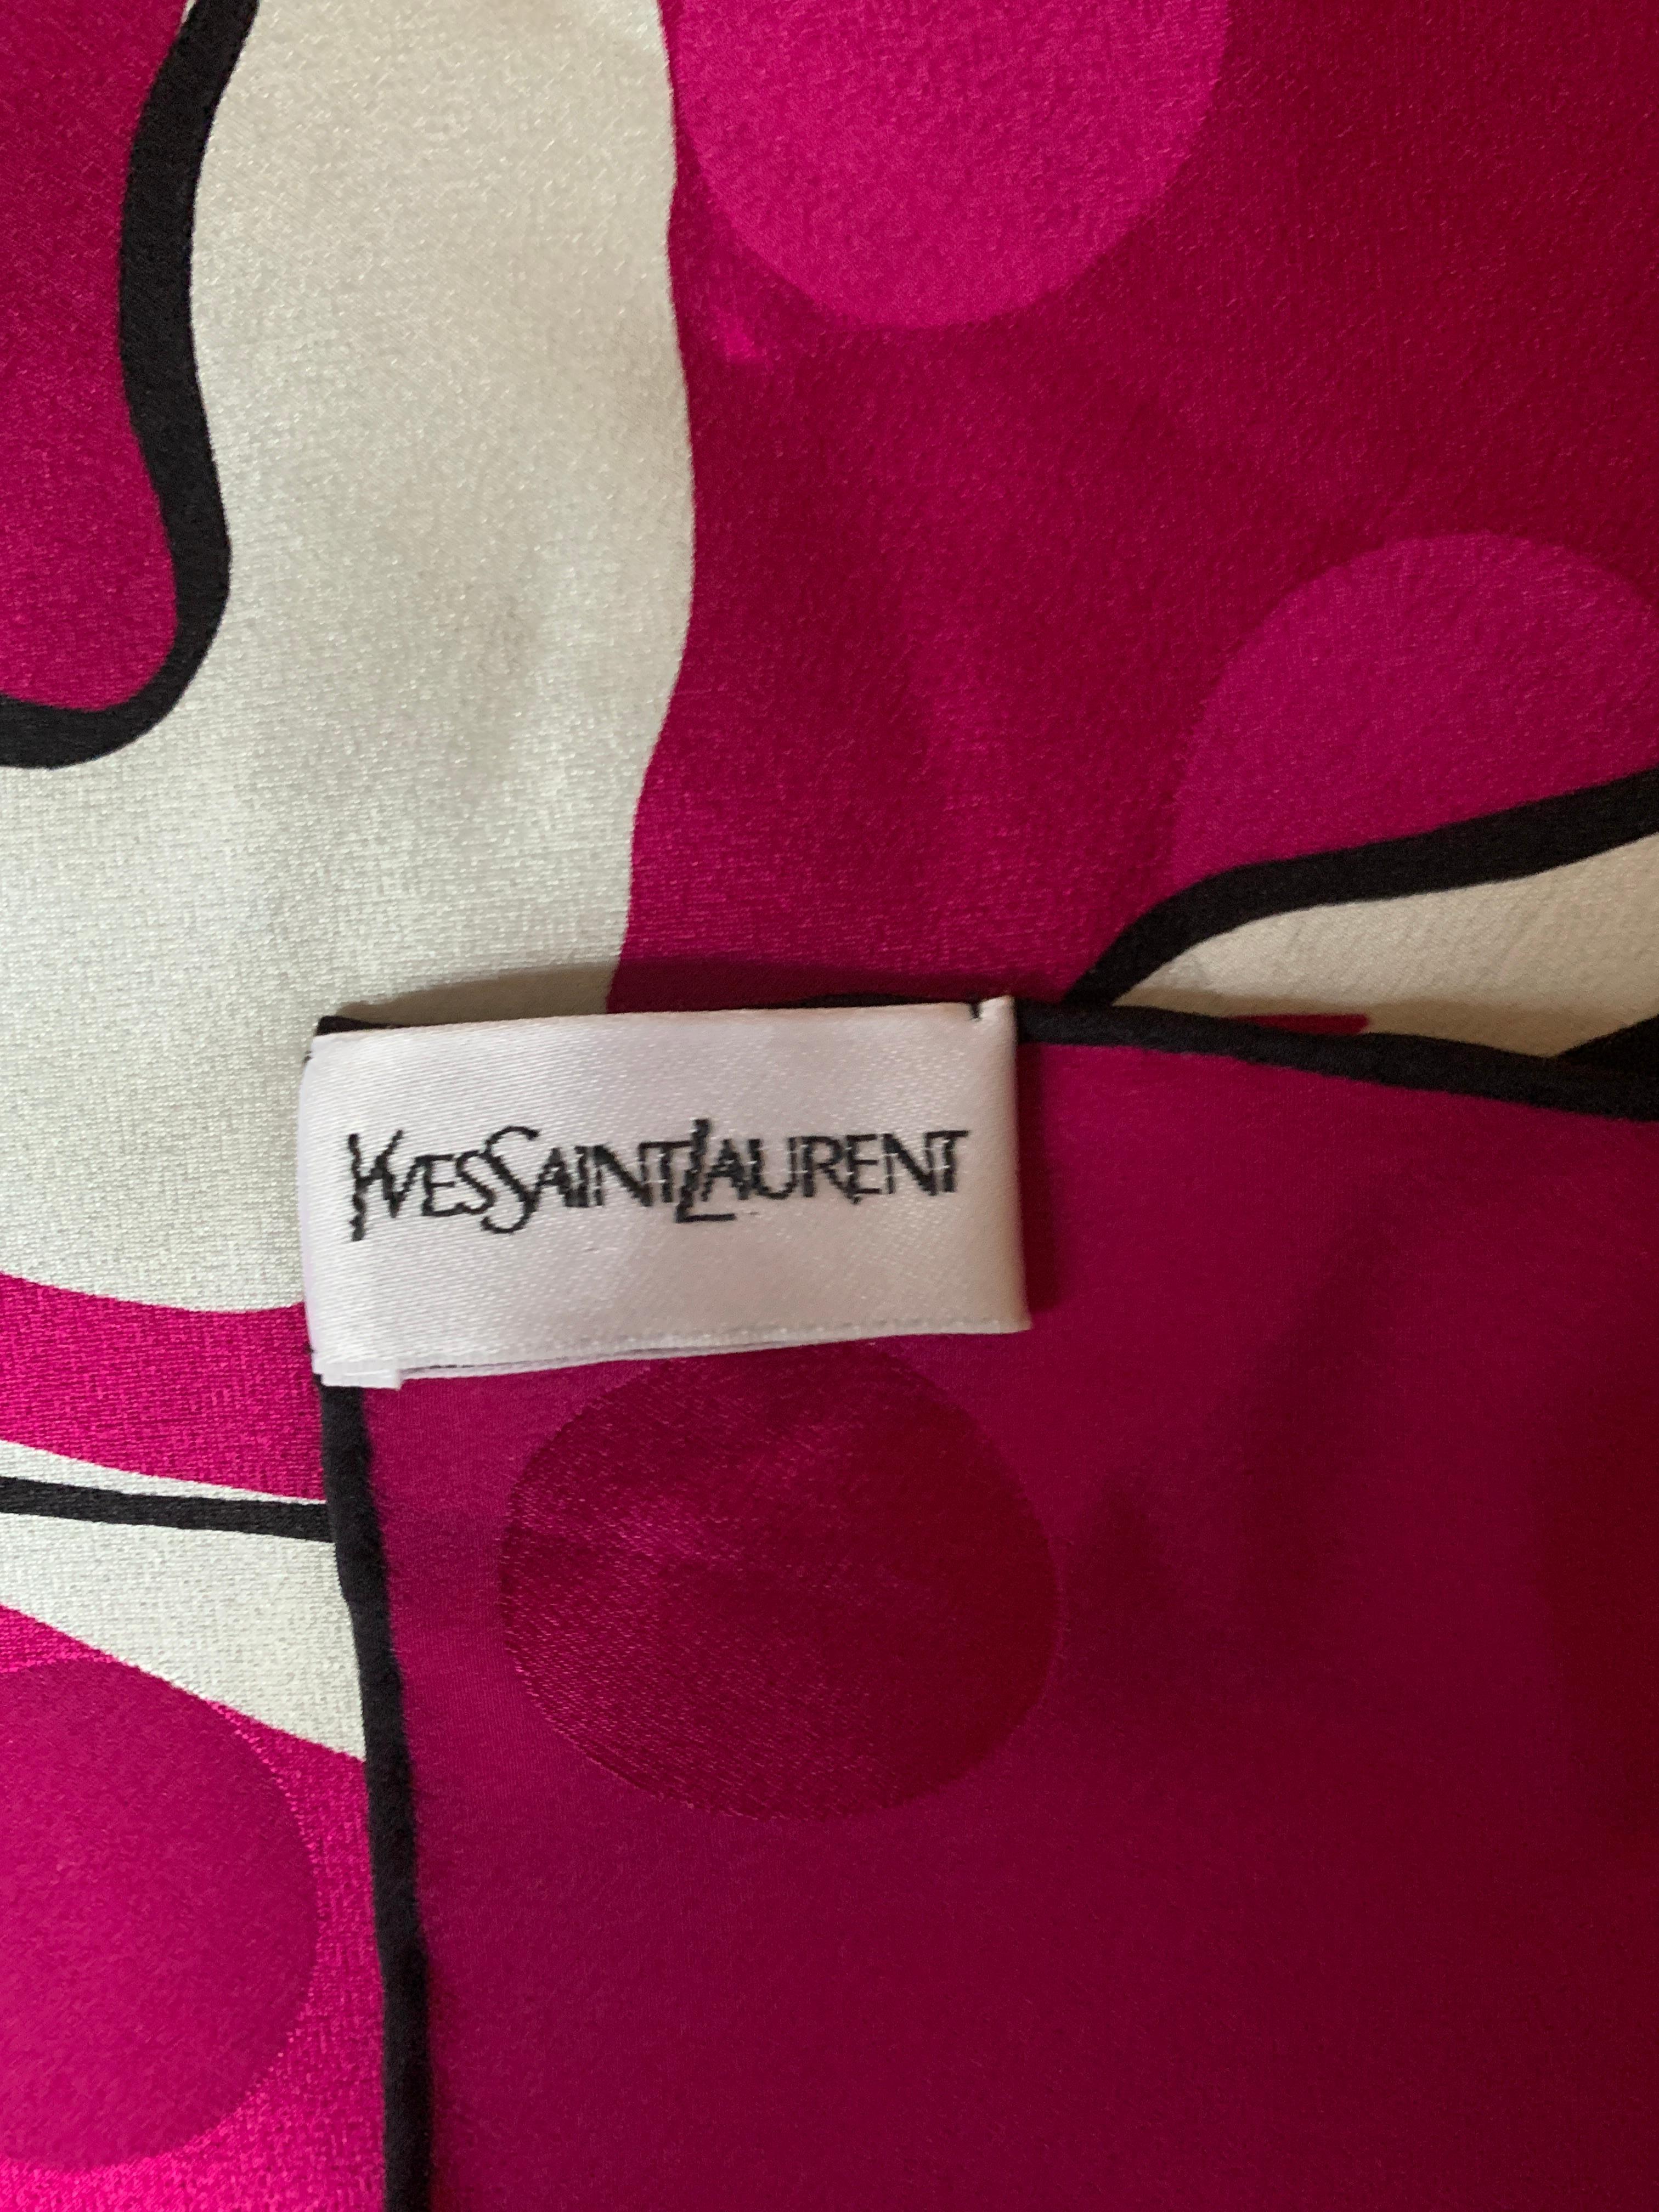 Yves Saint Laurent Vintage Silk Scarf in Fuchsia Pink Dove and Ribbon Print 4